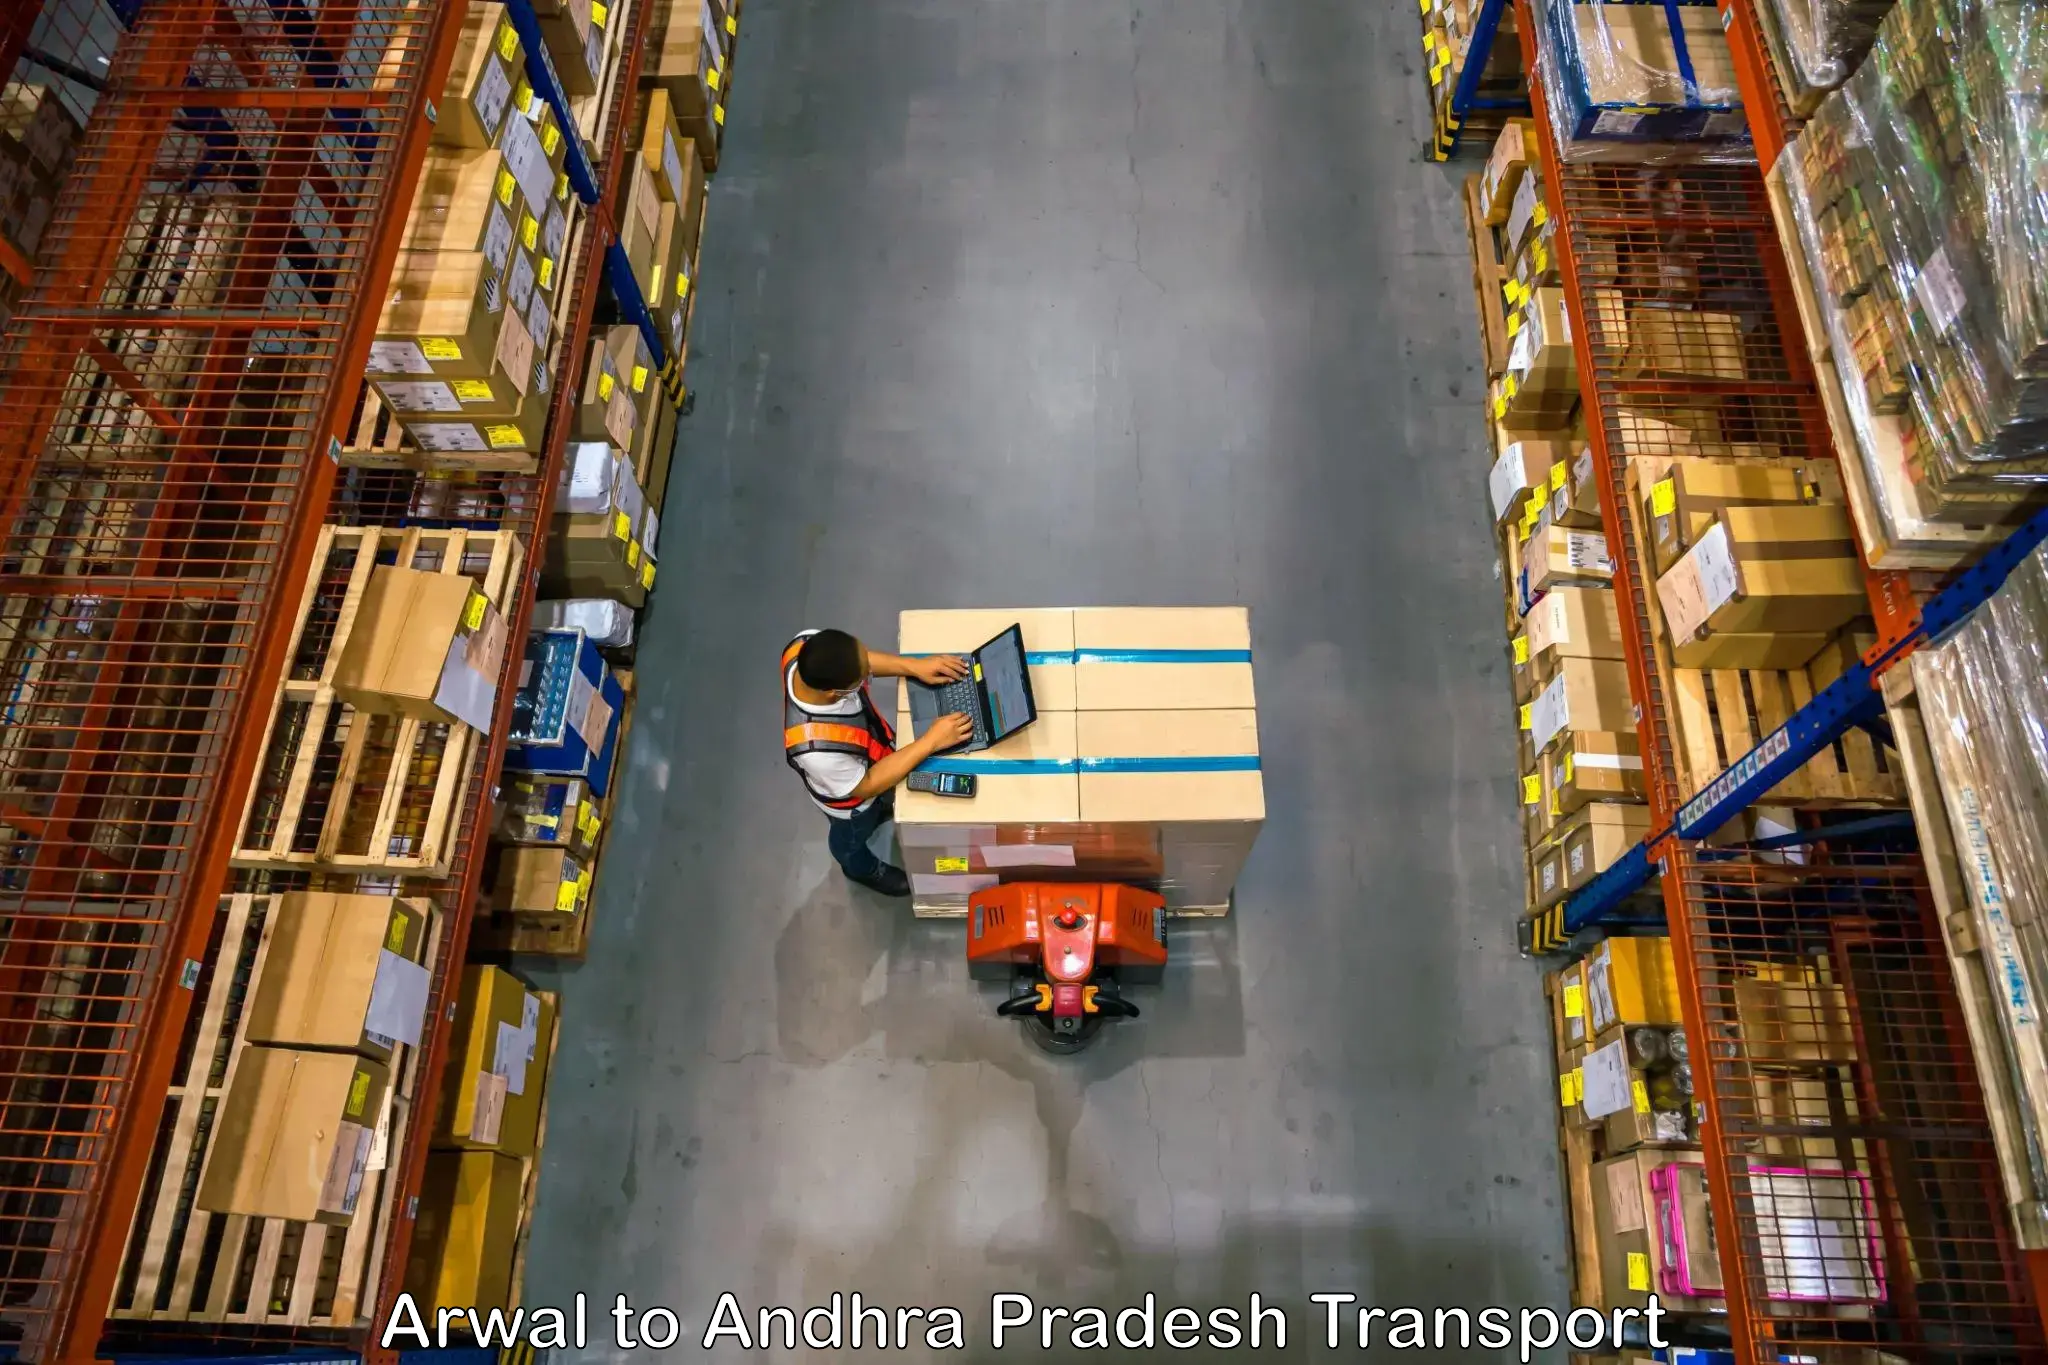 Domestic goods transportation services Arwal to Changaroth